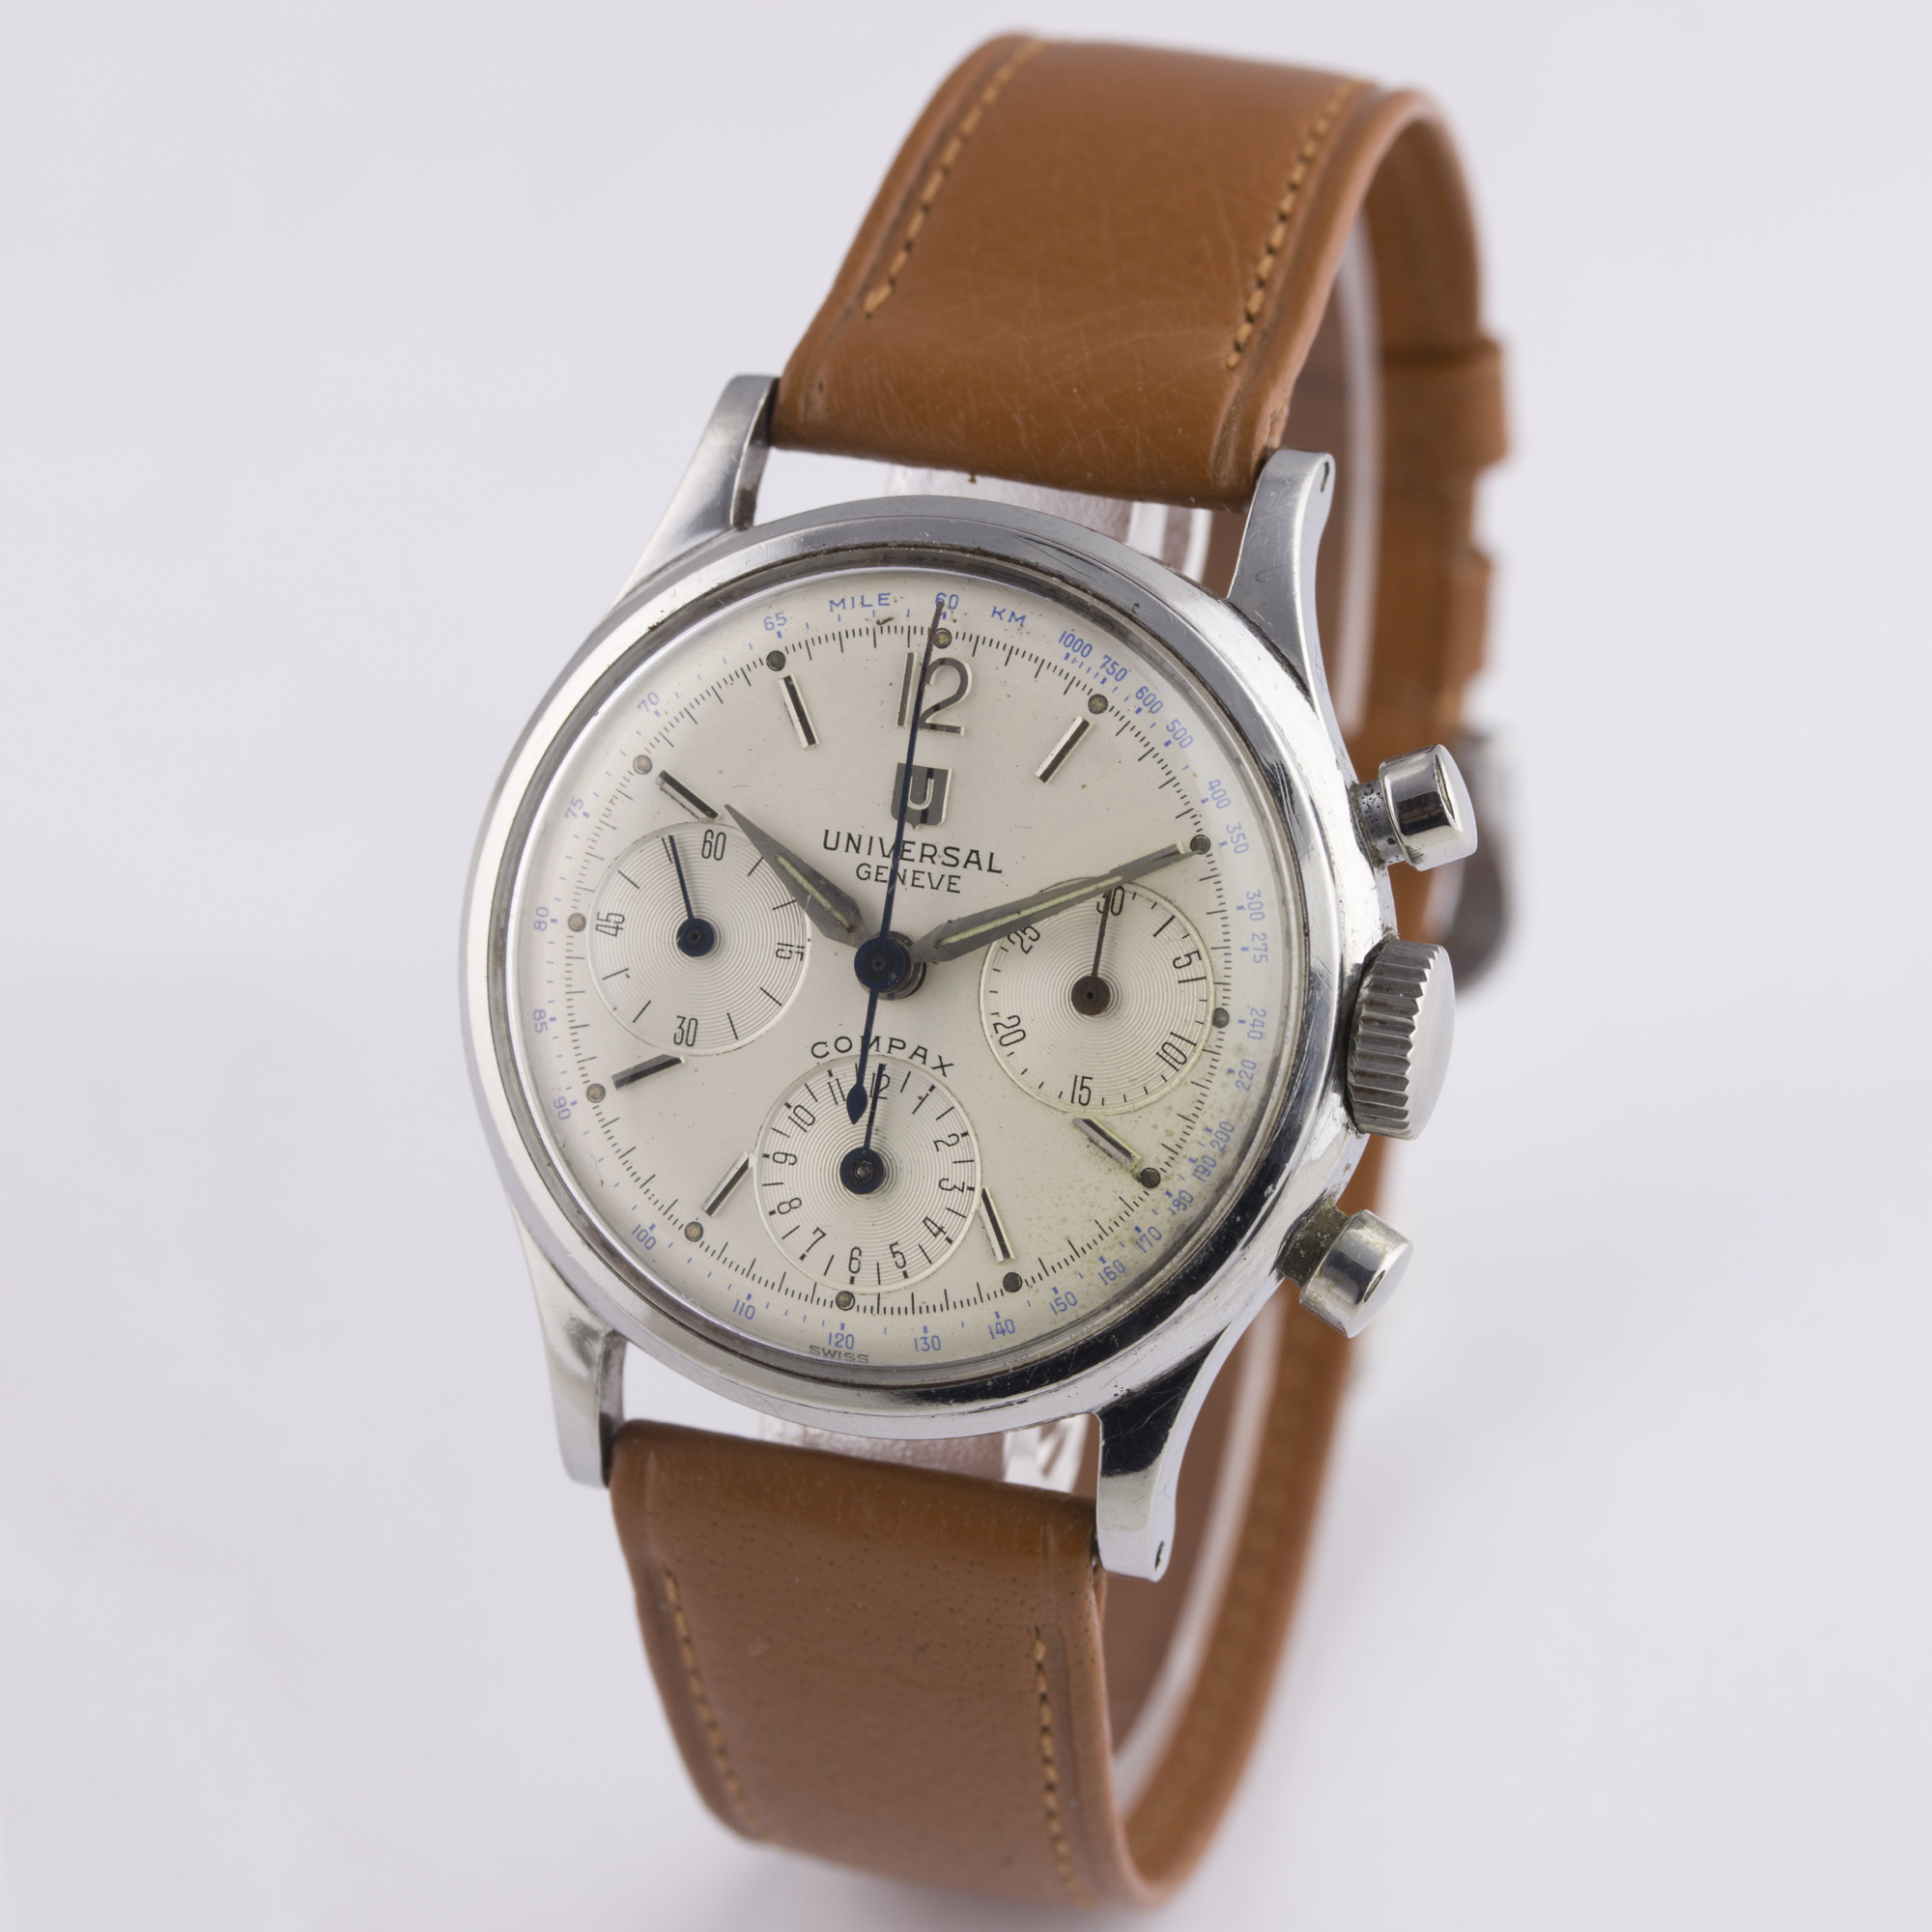 A RARE GENTLEMAN'S STAINLESS STEEL UNIVERSAL GENEVE COMPAX CHRONOGRAPH WRIST WATCH CIRCA 1950s, REF. - Image 4 of 8